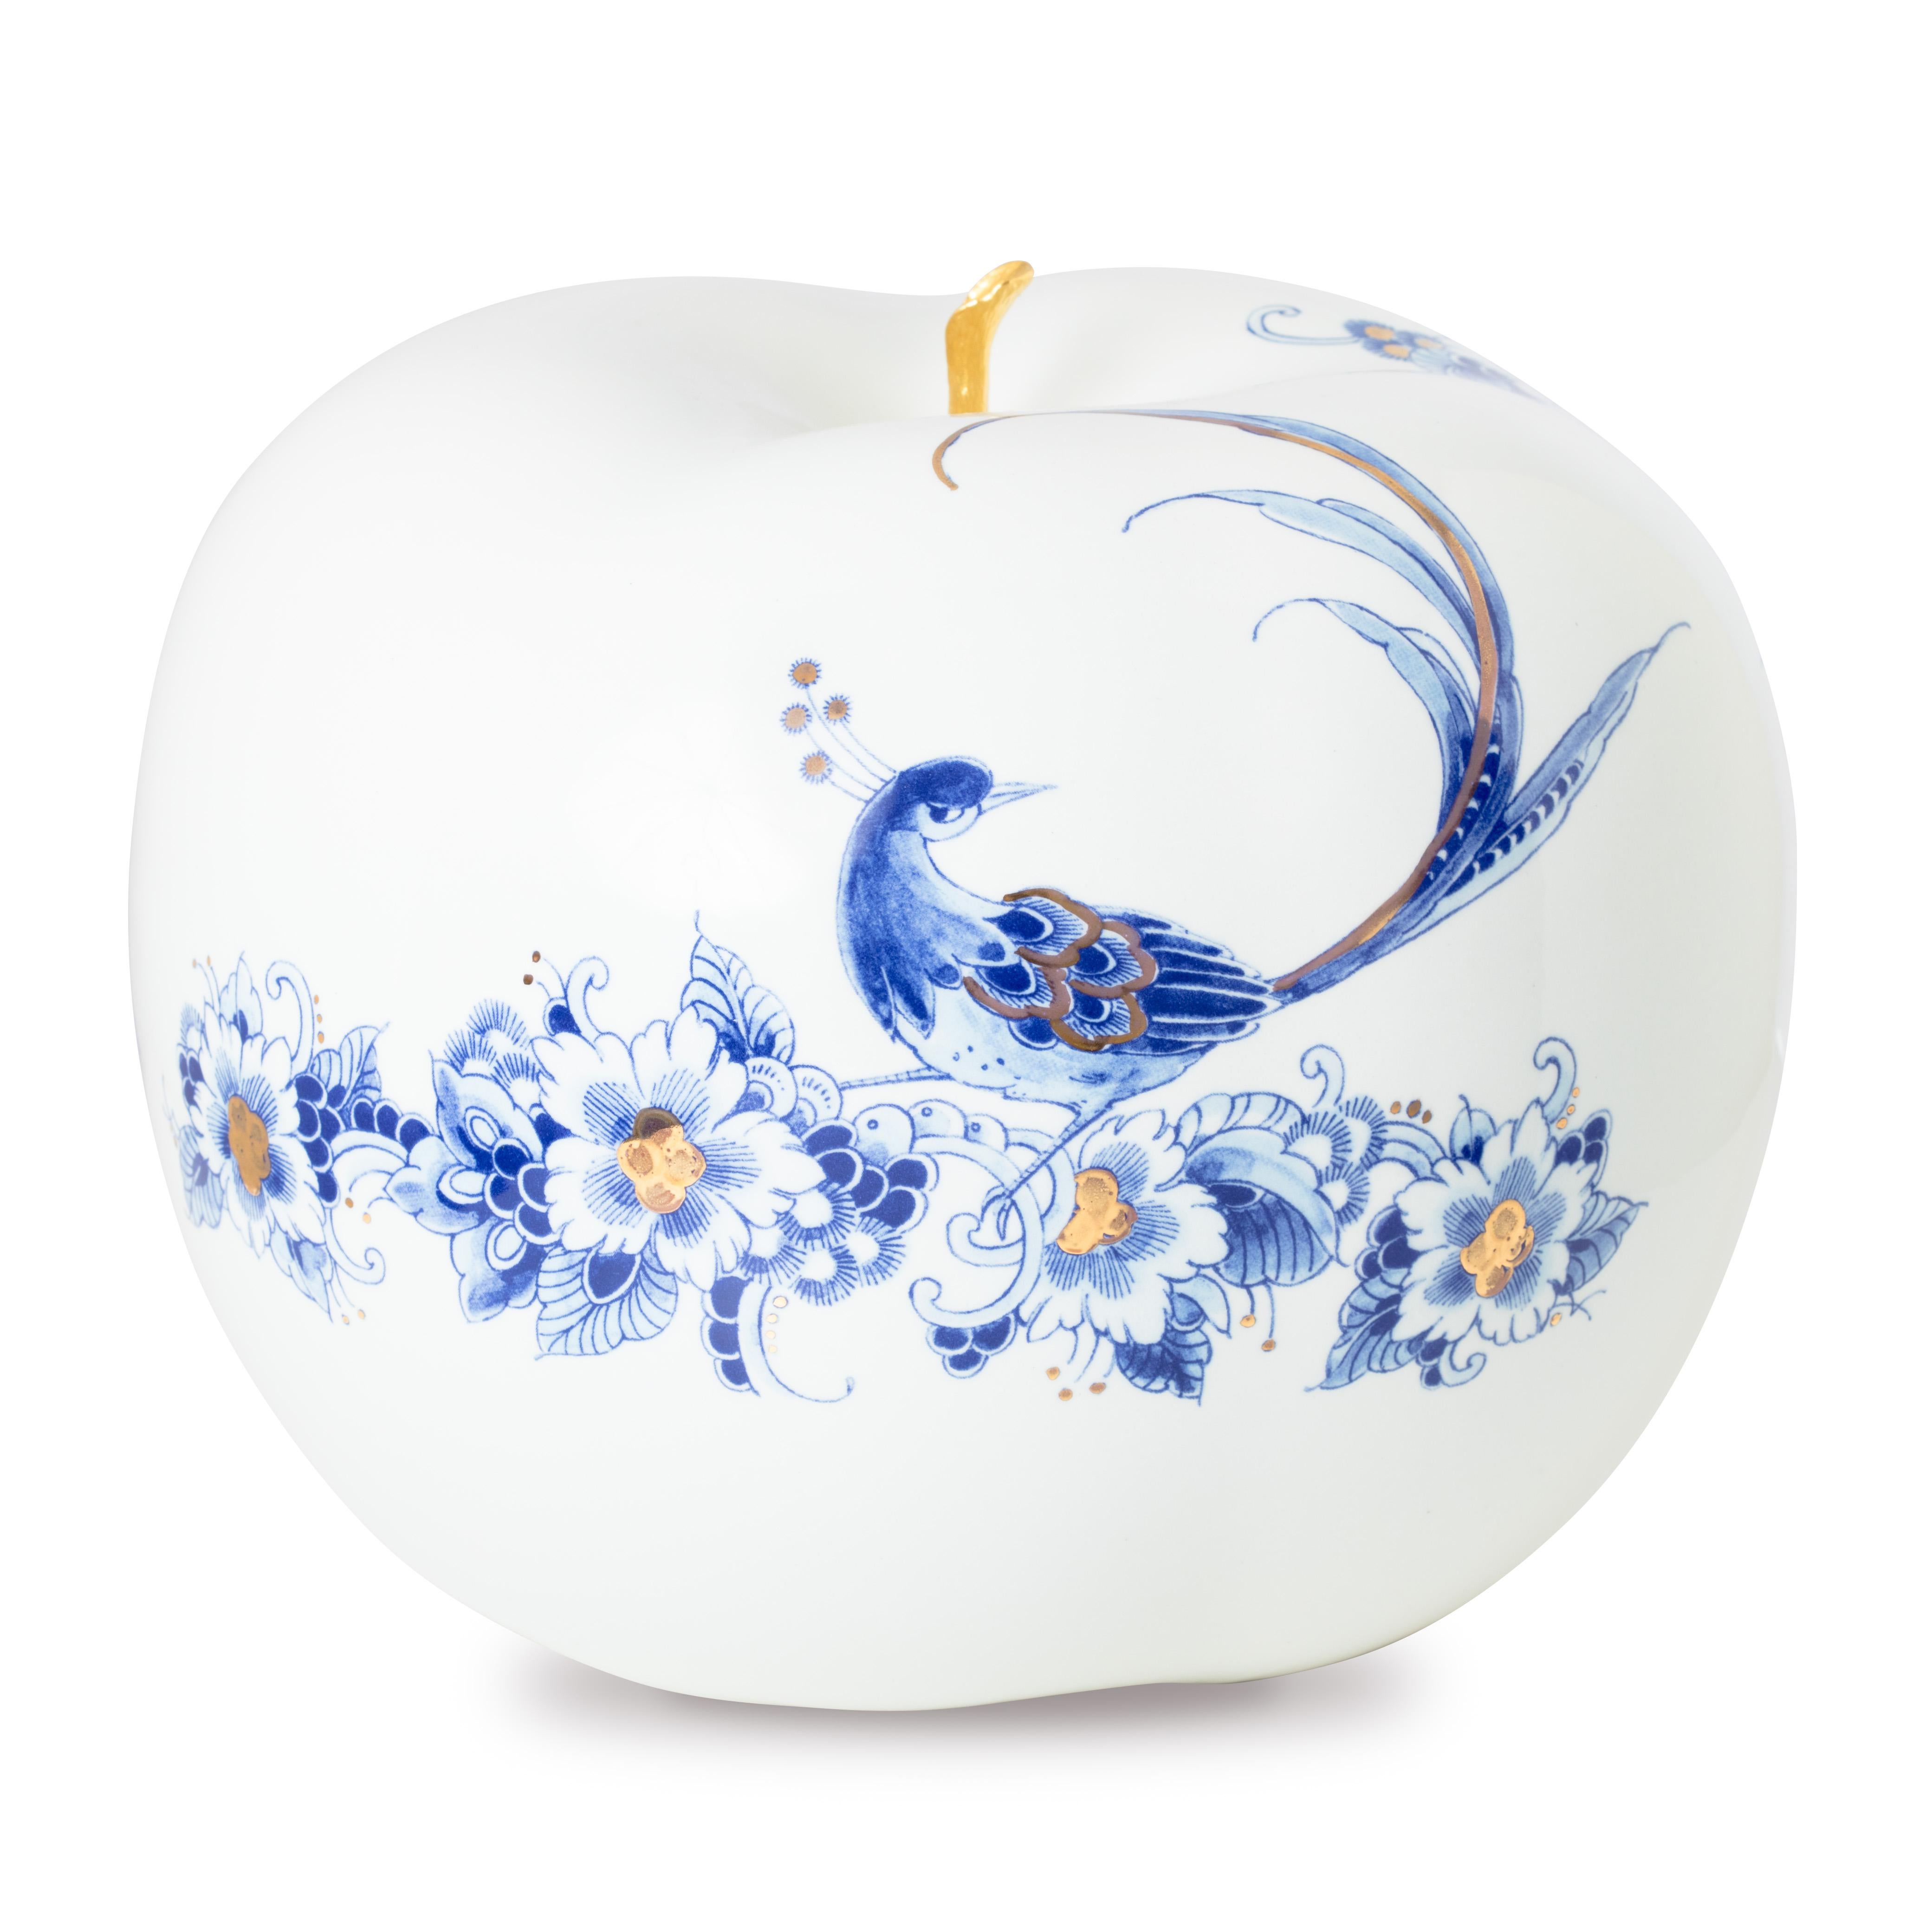 FLEUR Royal Dots 29 cm is part of the ROYAL BLUE COLLECTION ® – BLOOM Edition. The collection consists of different sizes of handmade apples of excellent ceramics with beautiful Delft Blue decorations. The object is decorated with a plated 24 krt.